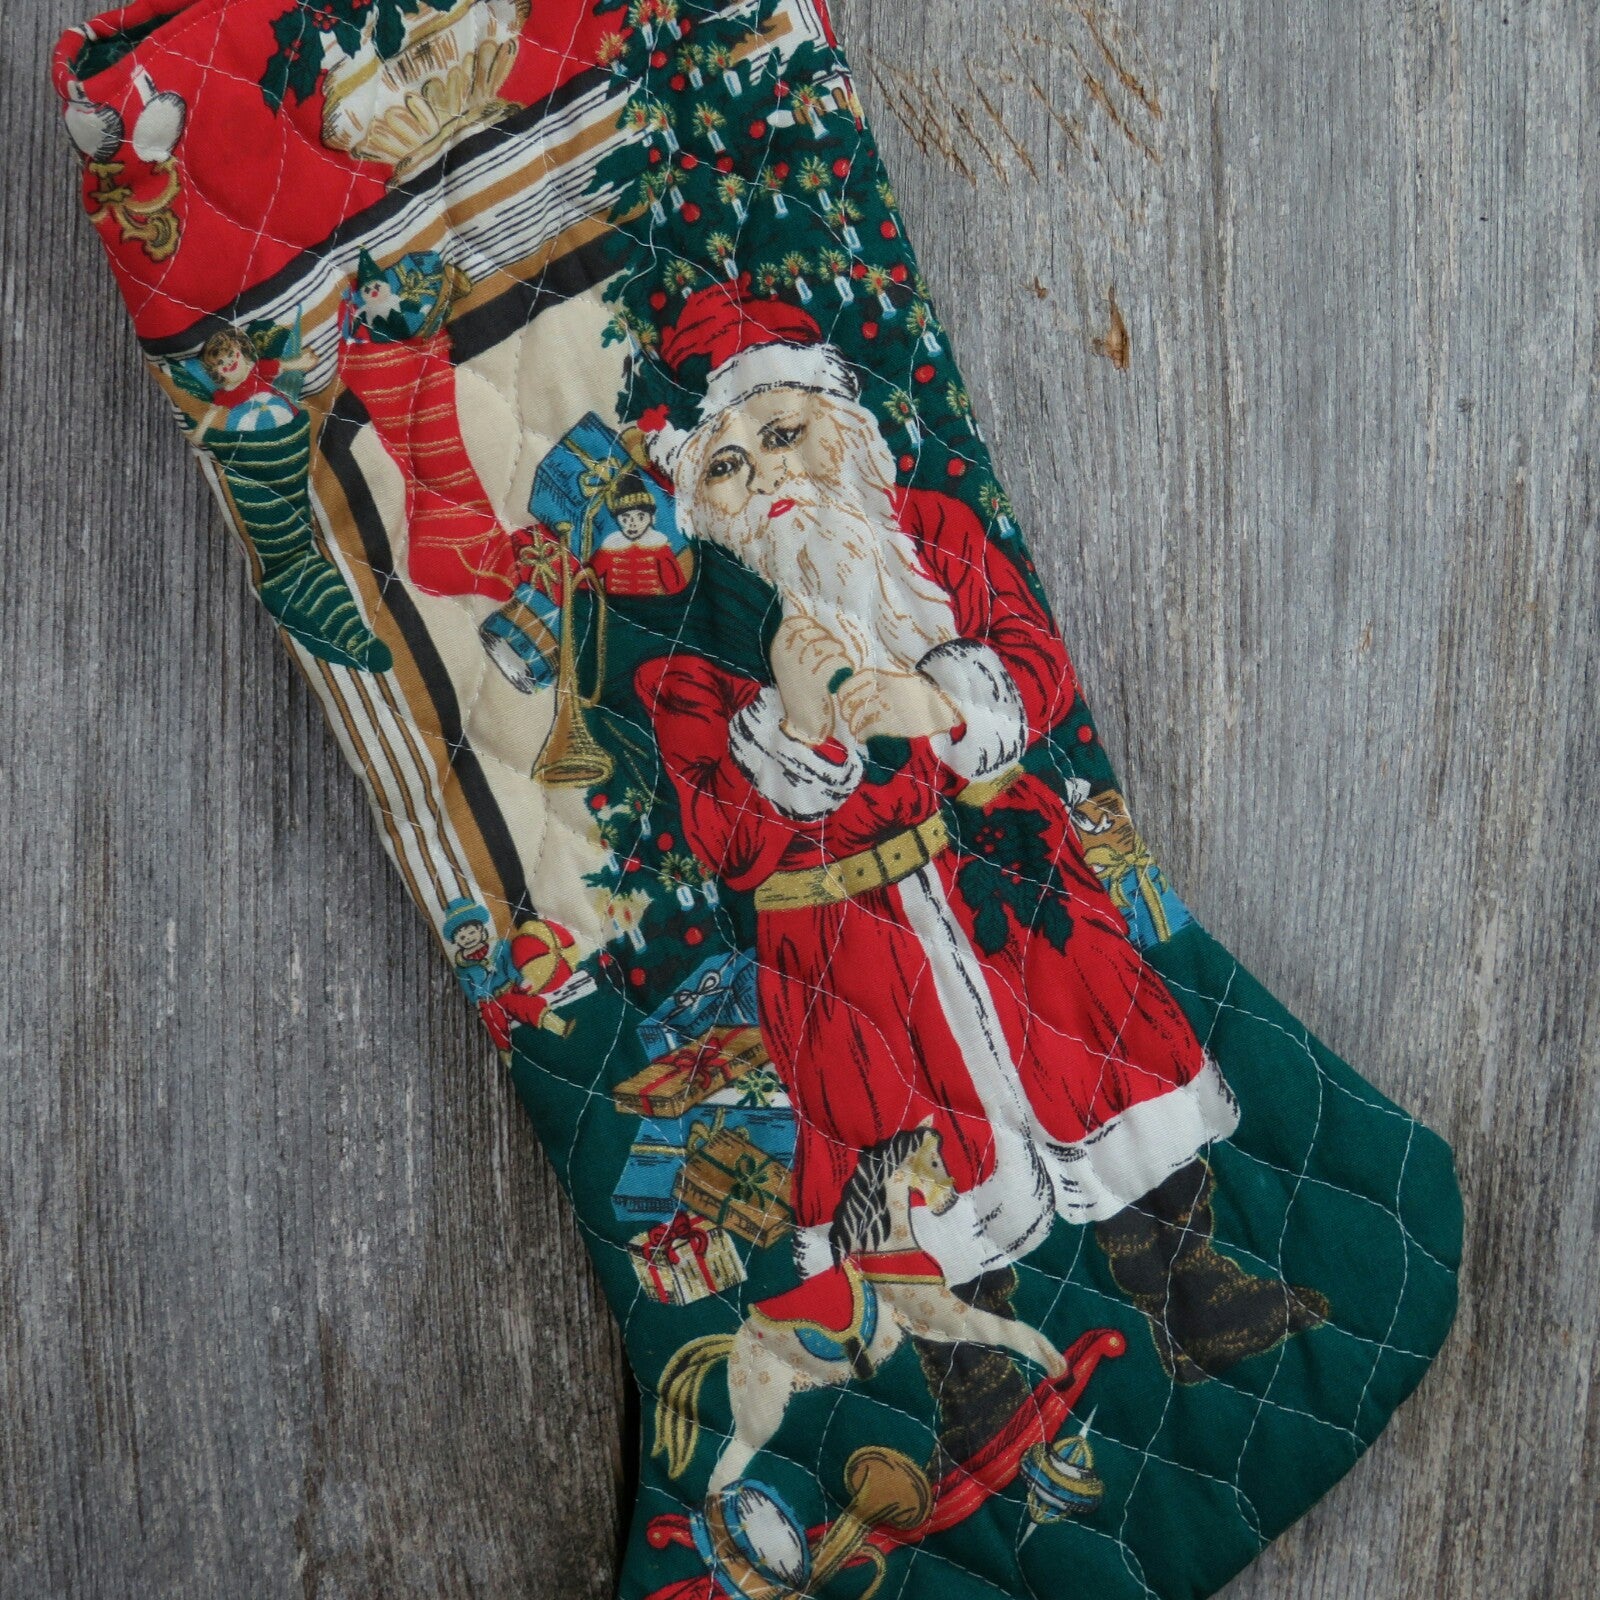 Vintage Santa Stocking Christmas Handmade Quilted Fabric Toys Tree Gifts Rocking Horse ST119 - At Grandma's Table